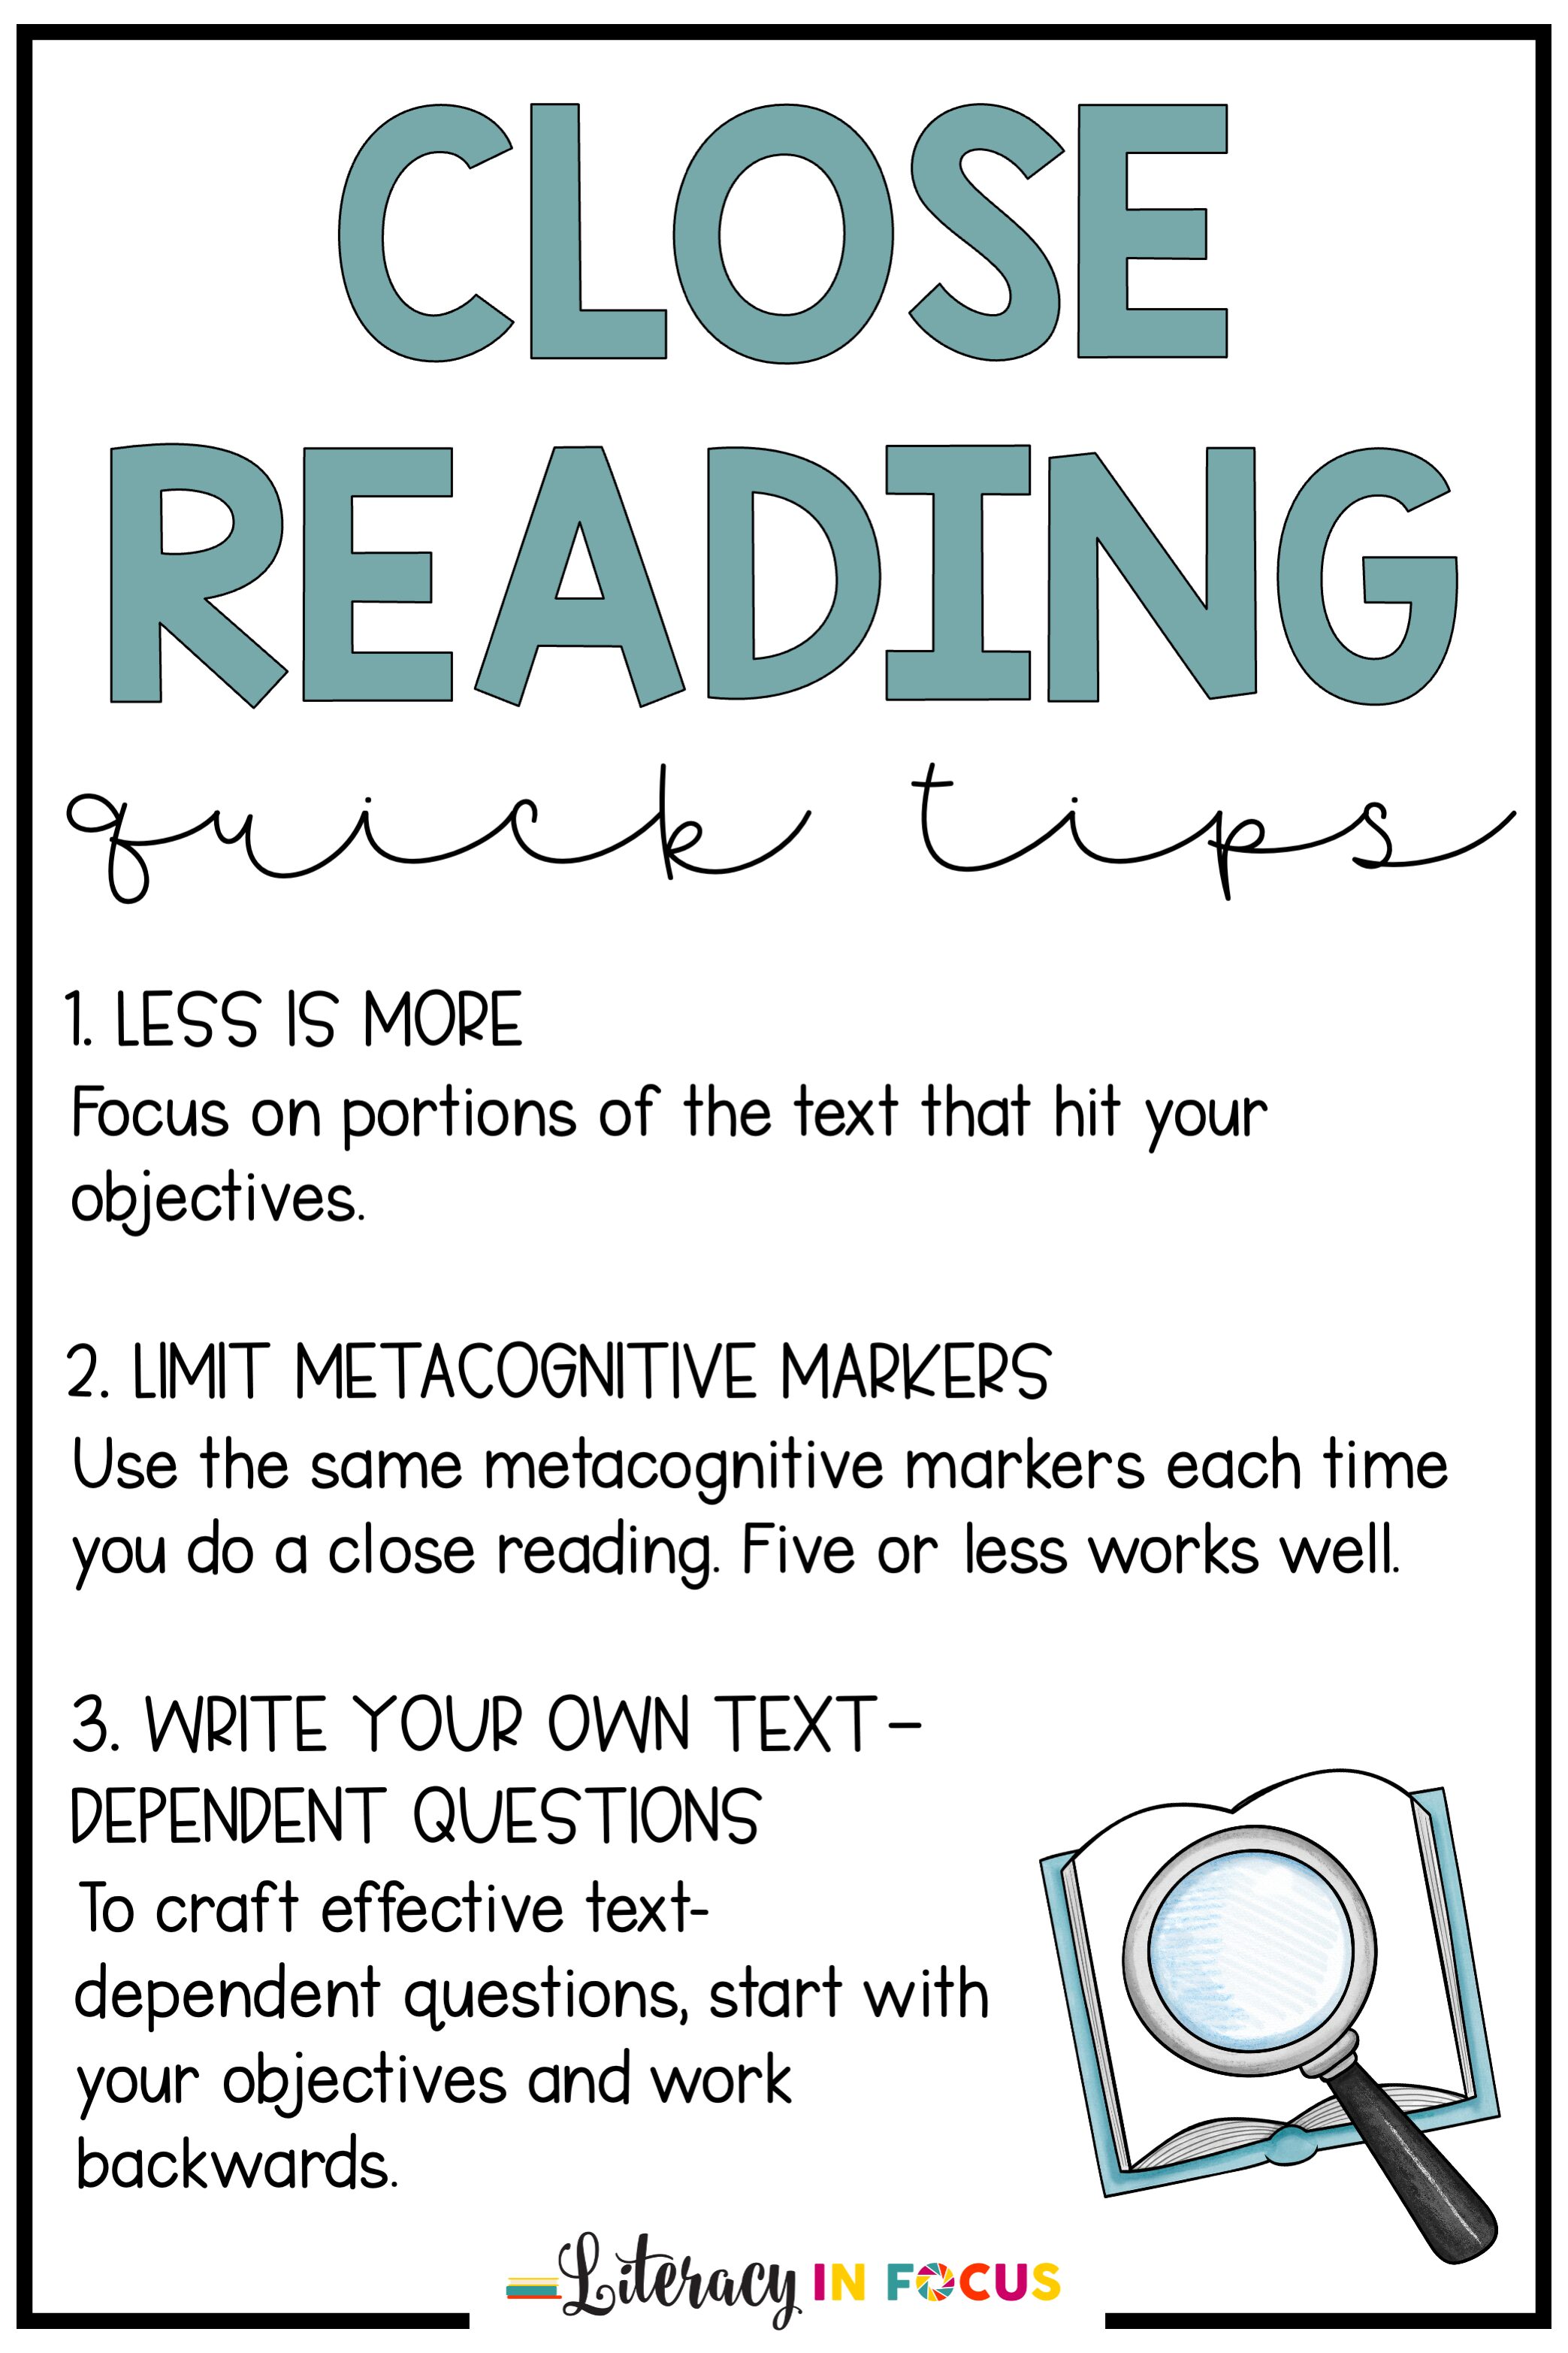 Close Reading Tips for Teachers